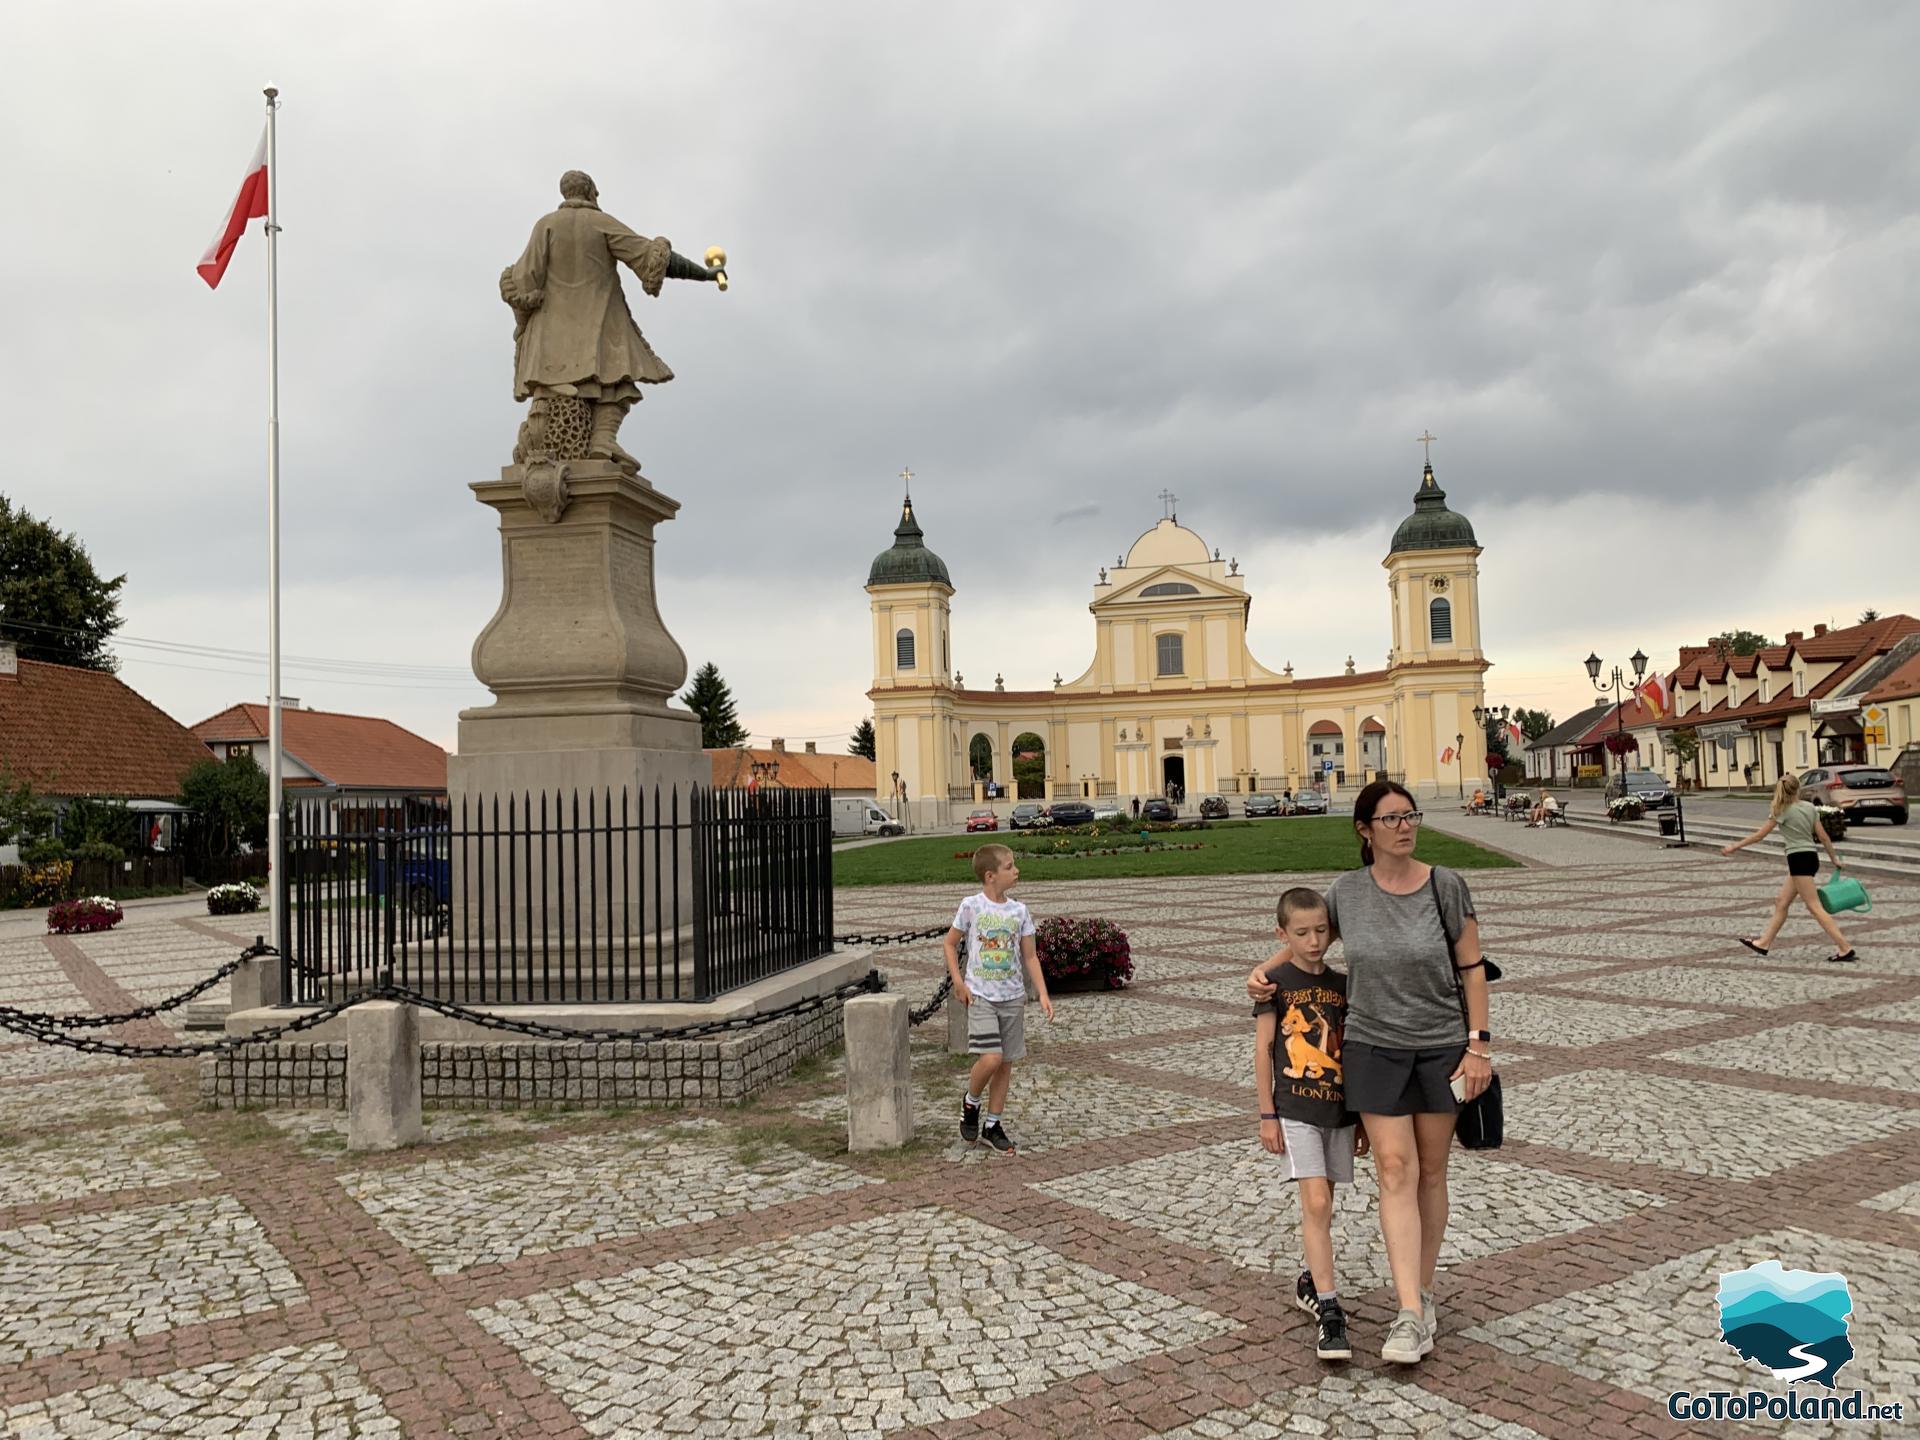 the main square in the town, a monument to a military commander, a woman and two children near the monument, a church with a yellow facade in the background